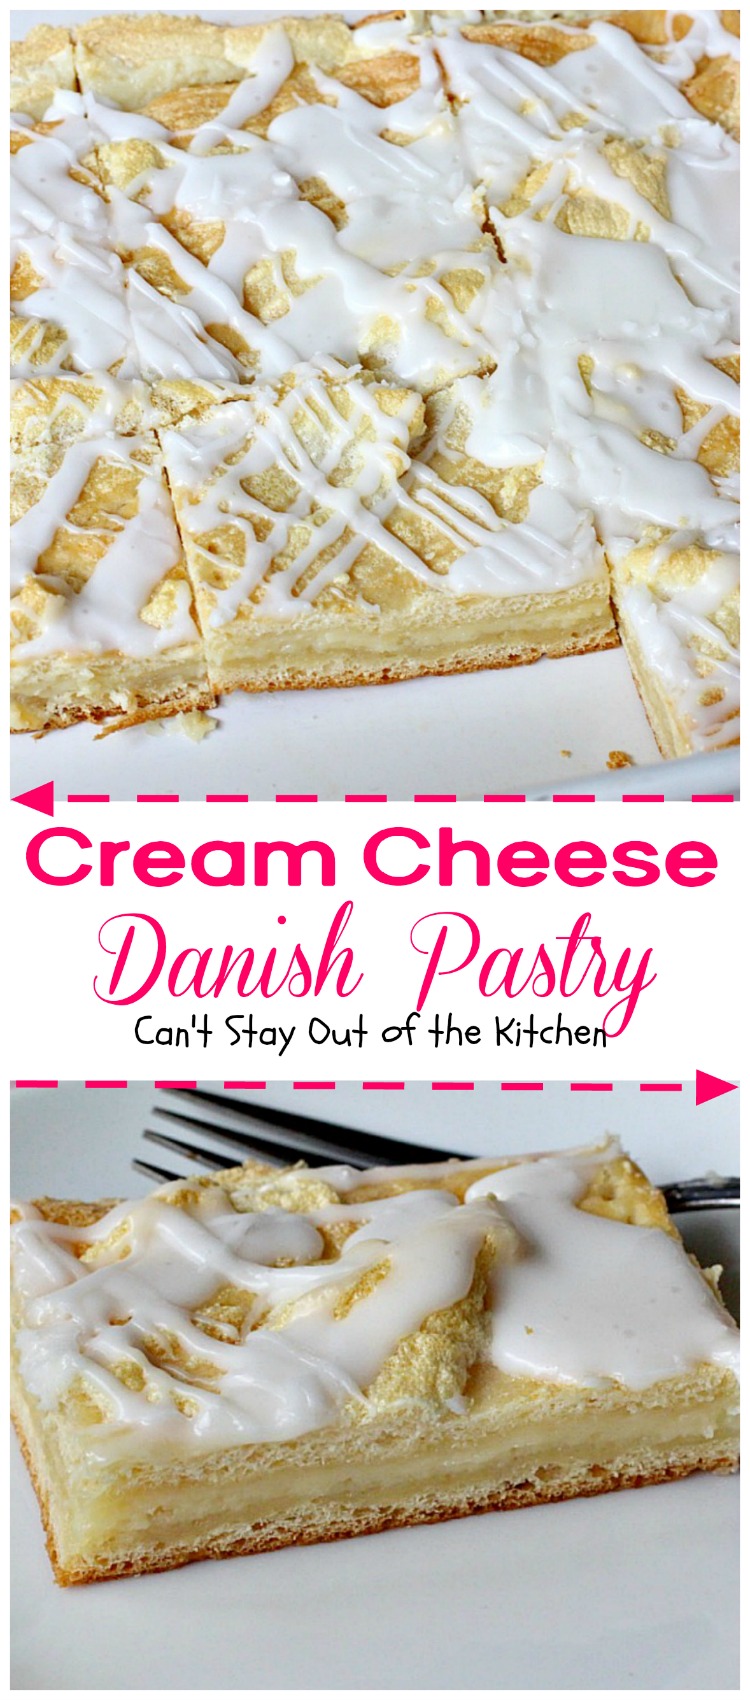 Cream Cheese Danish Pastry | Can't Stay Out of the Kitchen | this fabulous #danishpastry is great for #holiday #breakfasts and it's so, so easy to make.